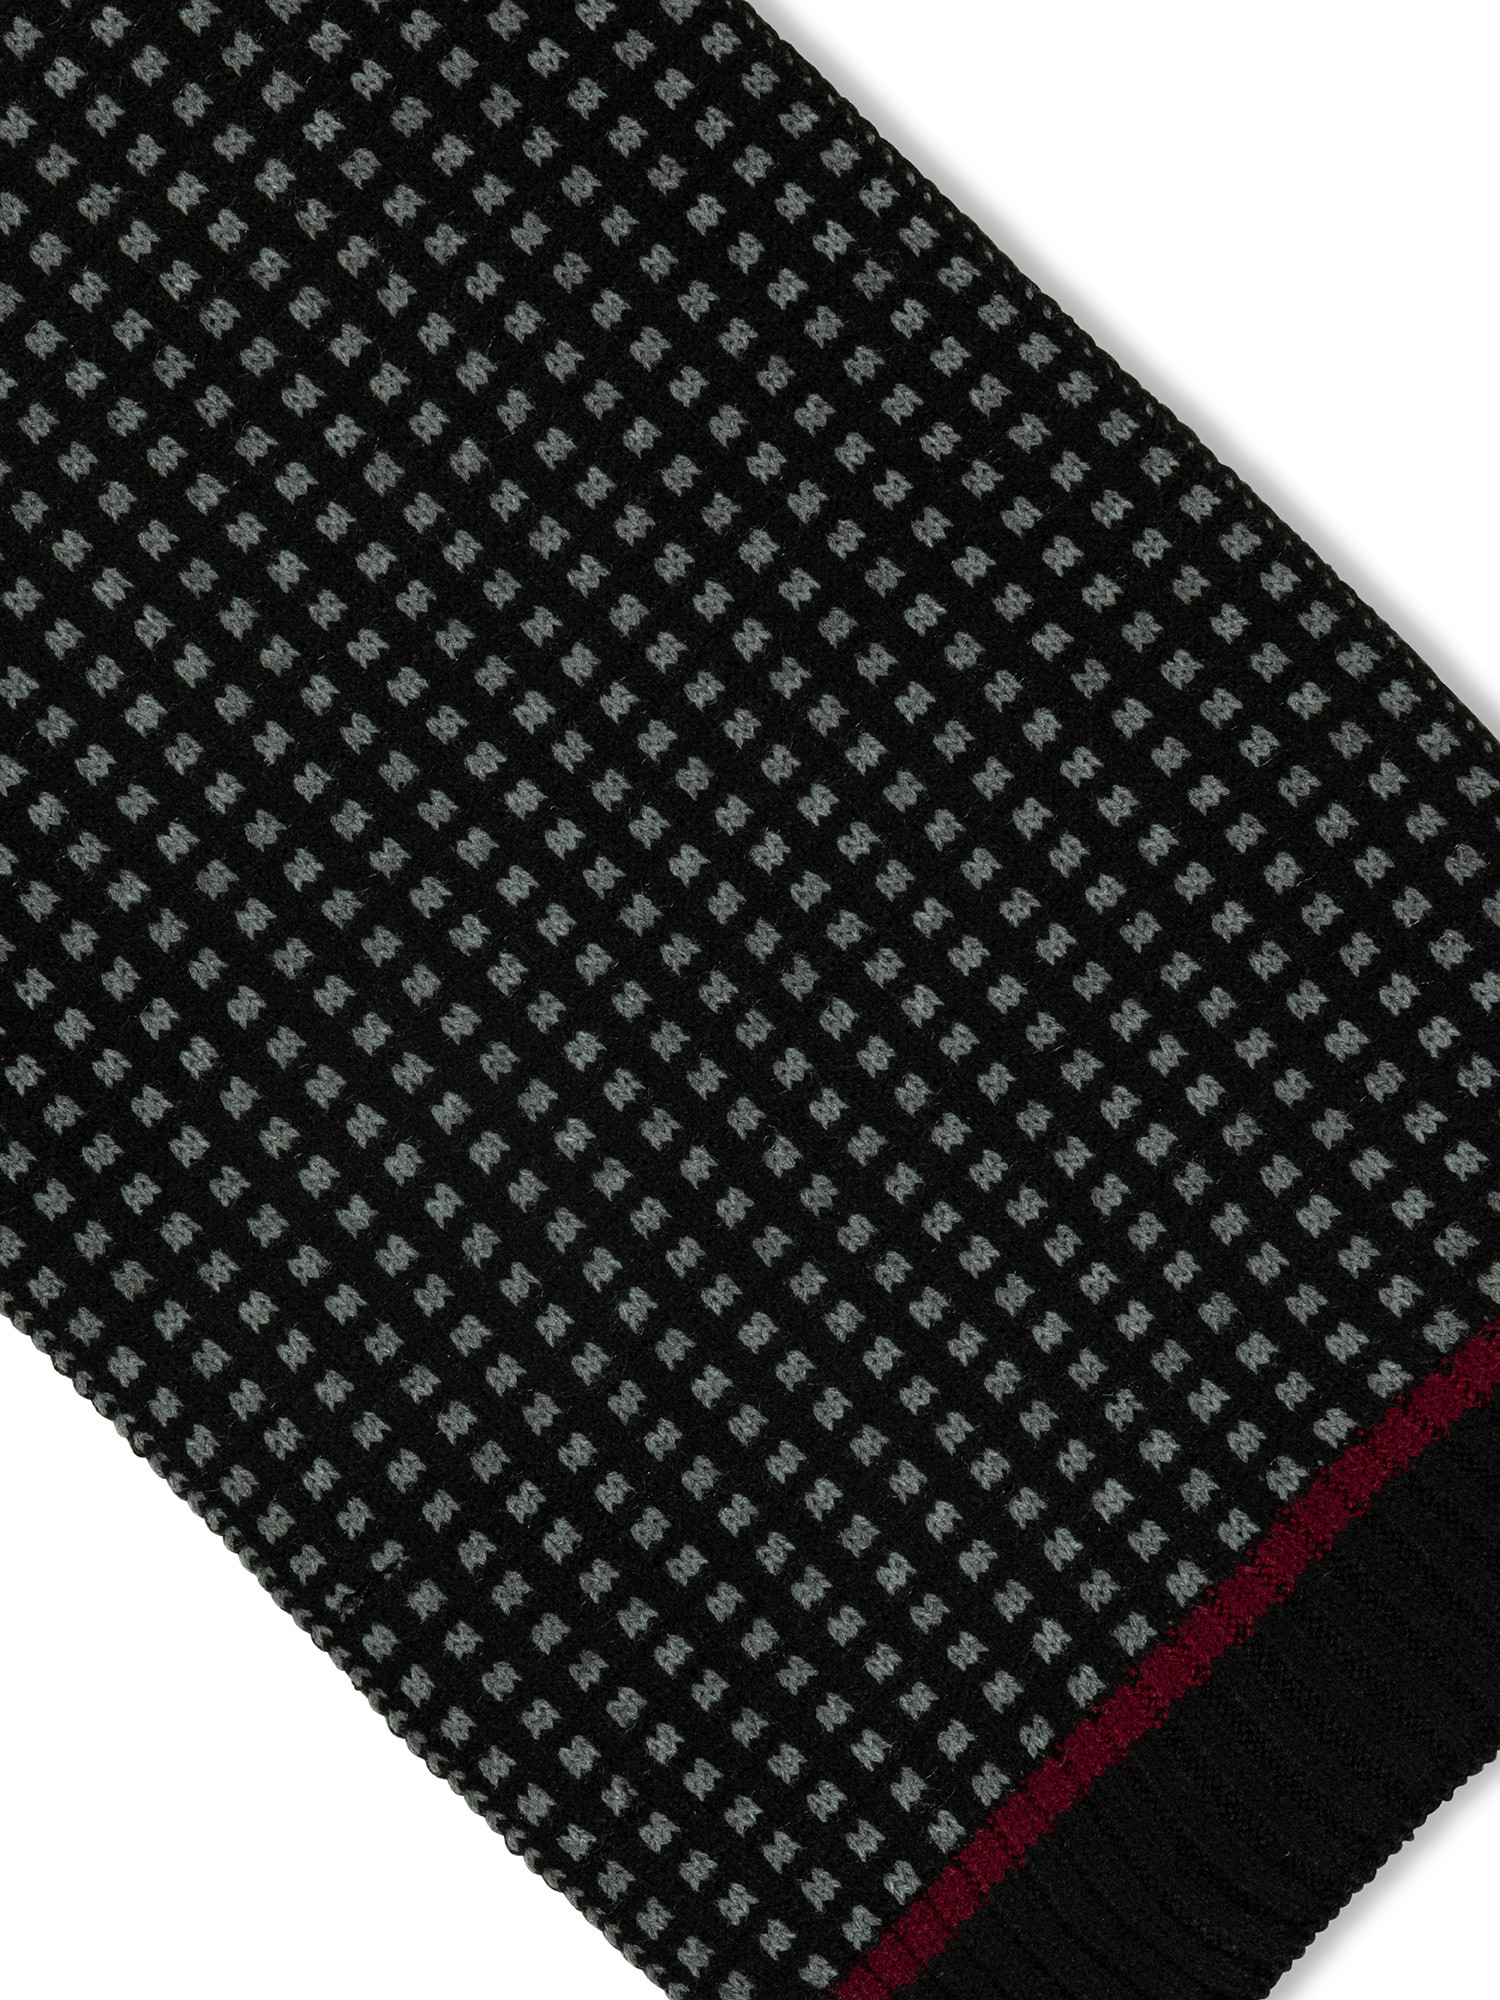 Luca D'Altieri - Checked scarf, Black, large image number 1